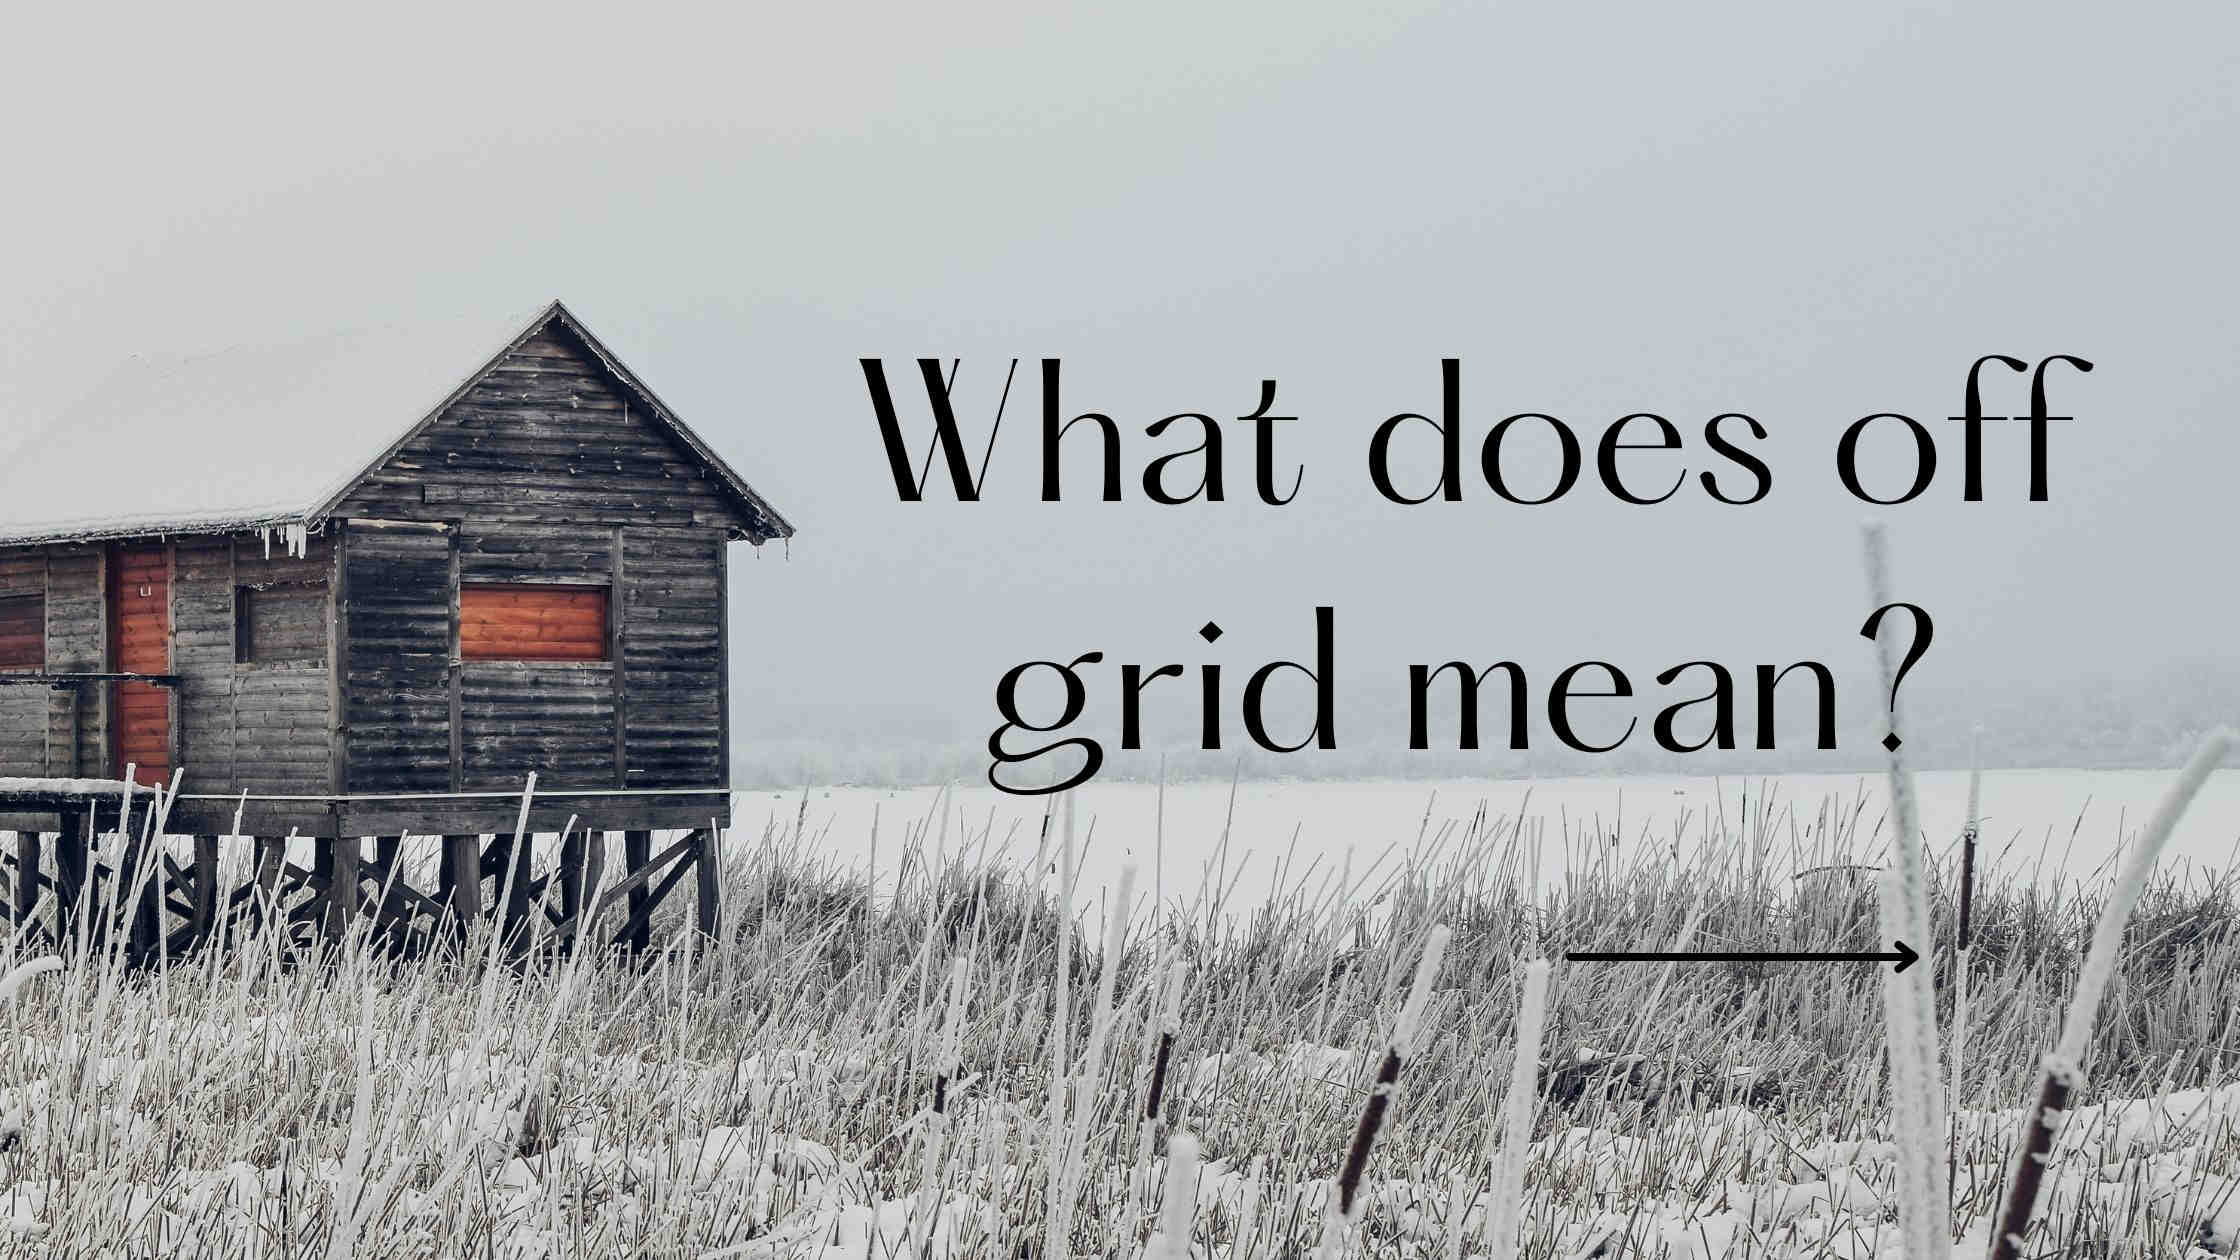 01 what does off grid mean